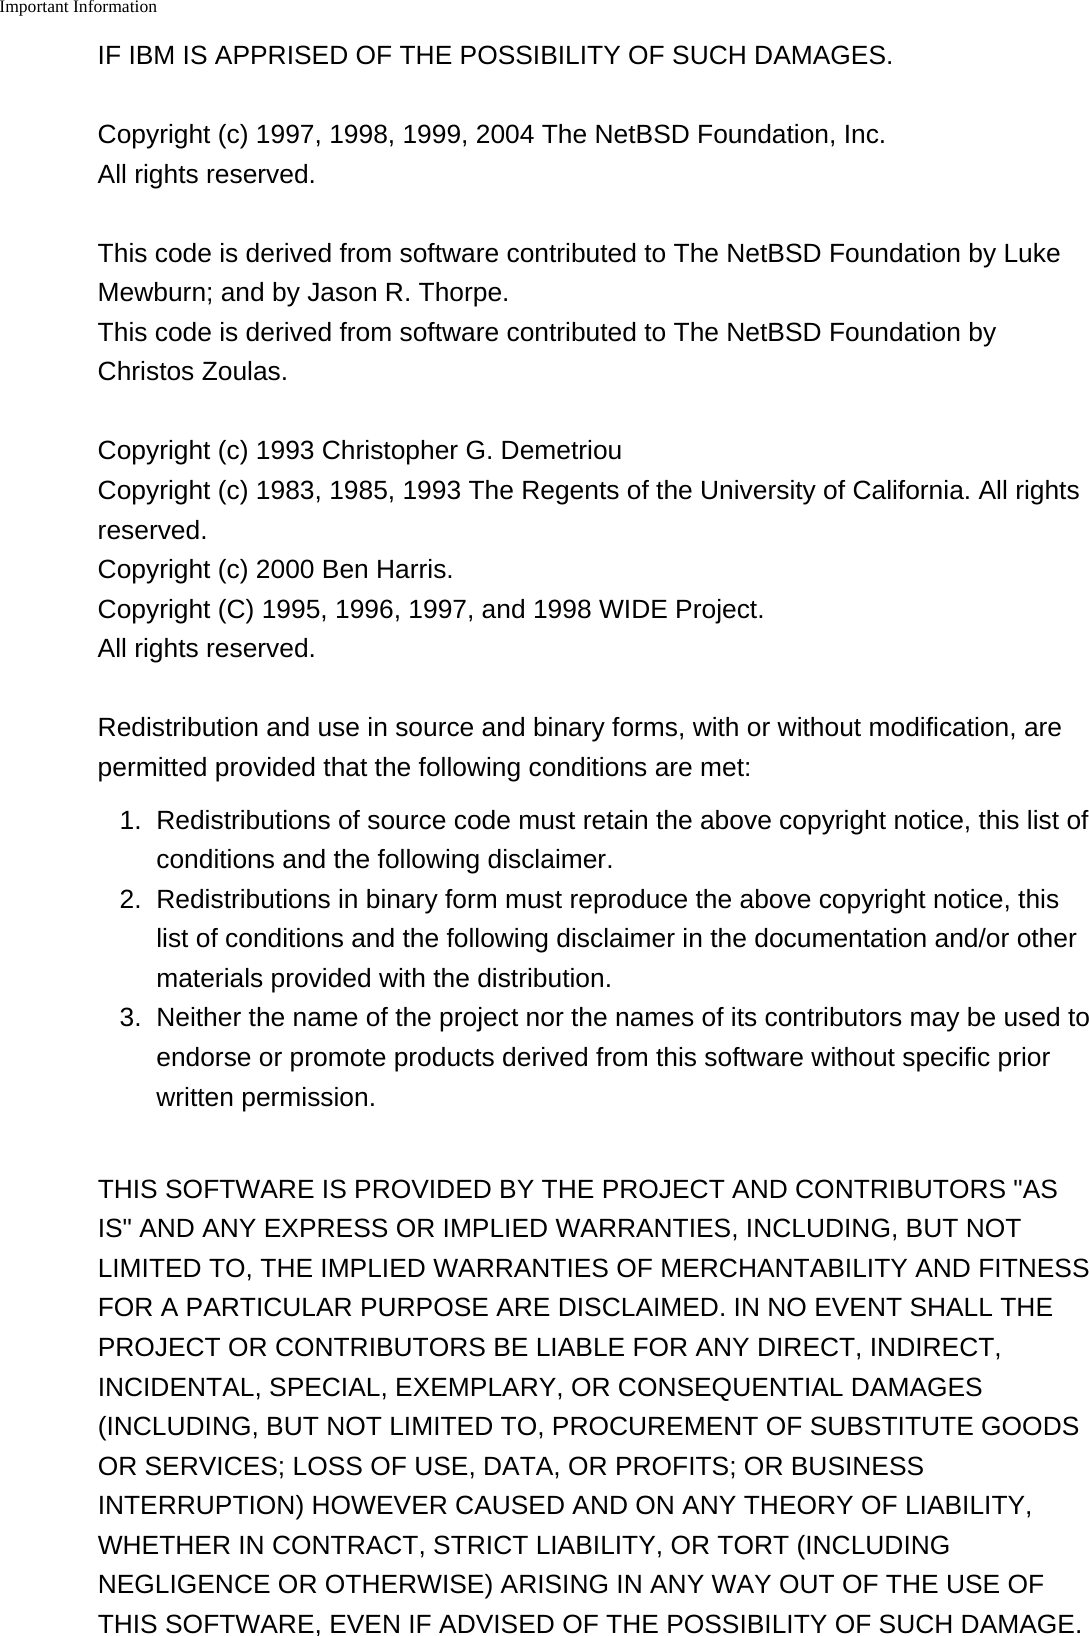 Important Information    IF IBM IS APPRISED OF THE POSSIBILITY OF SUCH DAMAGES.Copyright (c) 1997, 1998, 1999, 2004 The NetBSD Foundation, Inc.All rights reserved.This code is derived from software contributed to The NetBSD Foundation by LukeMewburn; and by Jason R. Thorpe.This code is derived from software contributed to The NetBSD Foundation byChristos Zoulas.Copyright (c) 1993 Christopher G. DemetriouCopyright (c) 1983, 1985, 1993 The Regents of the University of California. All rightsreserved.Copyright (c) 2000 Ben Harris.Copyright (C) 1995, 1996, 1997, and 1998 WIDE Project.All rights reserved.Redistribution and use in source and binary forms, with or without modification, arepermitted provided that the following conditions are met:1. Redistributions of source code must retain the above copyright notice, this list ofconditions and the following disclaimer.2. Redistributions in binary form must reproduce the above copyright notice, thislist of conditions and the following disclaimer in the documentation and/or othermaterials provided with the distribution.3.Neither the name of the project nor the names of its contributors may be used toendorse or promote products derived from this software without specific priorwritten permission.THIS SOFTWARE IS PROVIDED BY THE PROJECT AND CONTRIBUTORS &quot;ASIS&quot; AND ANY EXPRESS OR IMPLIED WARRANTIES, INCLUDING, BUT NOTLIMITED TO, THE IMPLIED WARRANTIES OF MERCHANTABILITY AND FITNESSFOR A PARTICULAR PURPOSE ARE DISCLAIMED. IN NO EVENT SHALL THEPROJECT OR CONTRIBUTORS BE LIABLE FOR ANY DIRECT, INDIRECT,INCIDENTAL, SPECIAL, EXEMPLARY, OR CONSEQUENTIAL DAMAGES(INCLUDING, BUT NOT LIMITED TO, PROCUREMENT OF SUBSTITUTE GOODSOR SERVICES; LOSS OF USE, DATA, OR PROFITS; OR BUSINESSINTERRUPTION) HOWEVER CAUSED AND ON ANY THEORY OF LIABILITY,WHETHER IN CONTRACT, STRICT LIABILITY, OR TORT (INCLUDINGNEGLIGENCE OR OTHERWISE) ARISING IN ANY WAY OUT OF THE USE OFTHIS SOFTWARE, EVEN IF ADVISED OF THE POSSIBILITY OF SUCH DAMAGE.